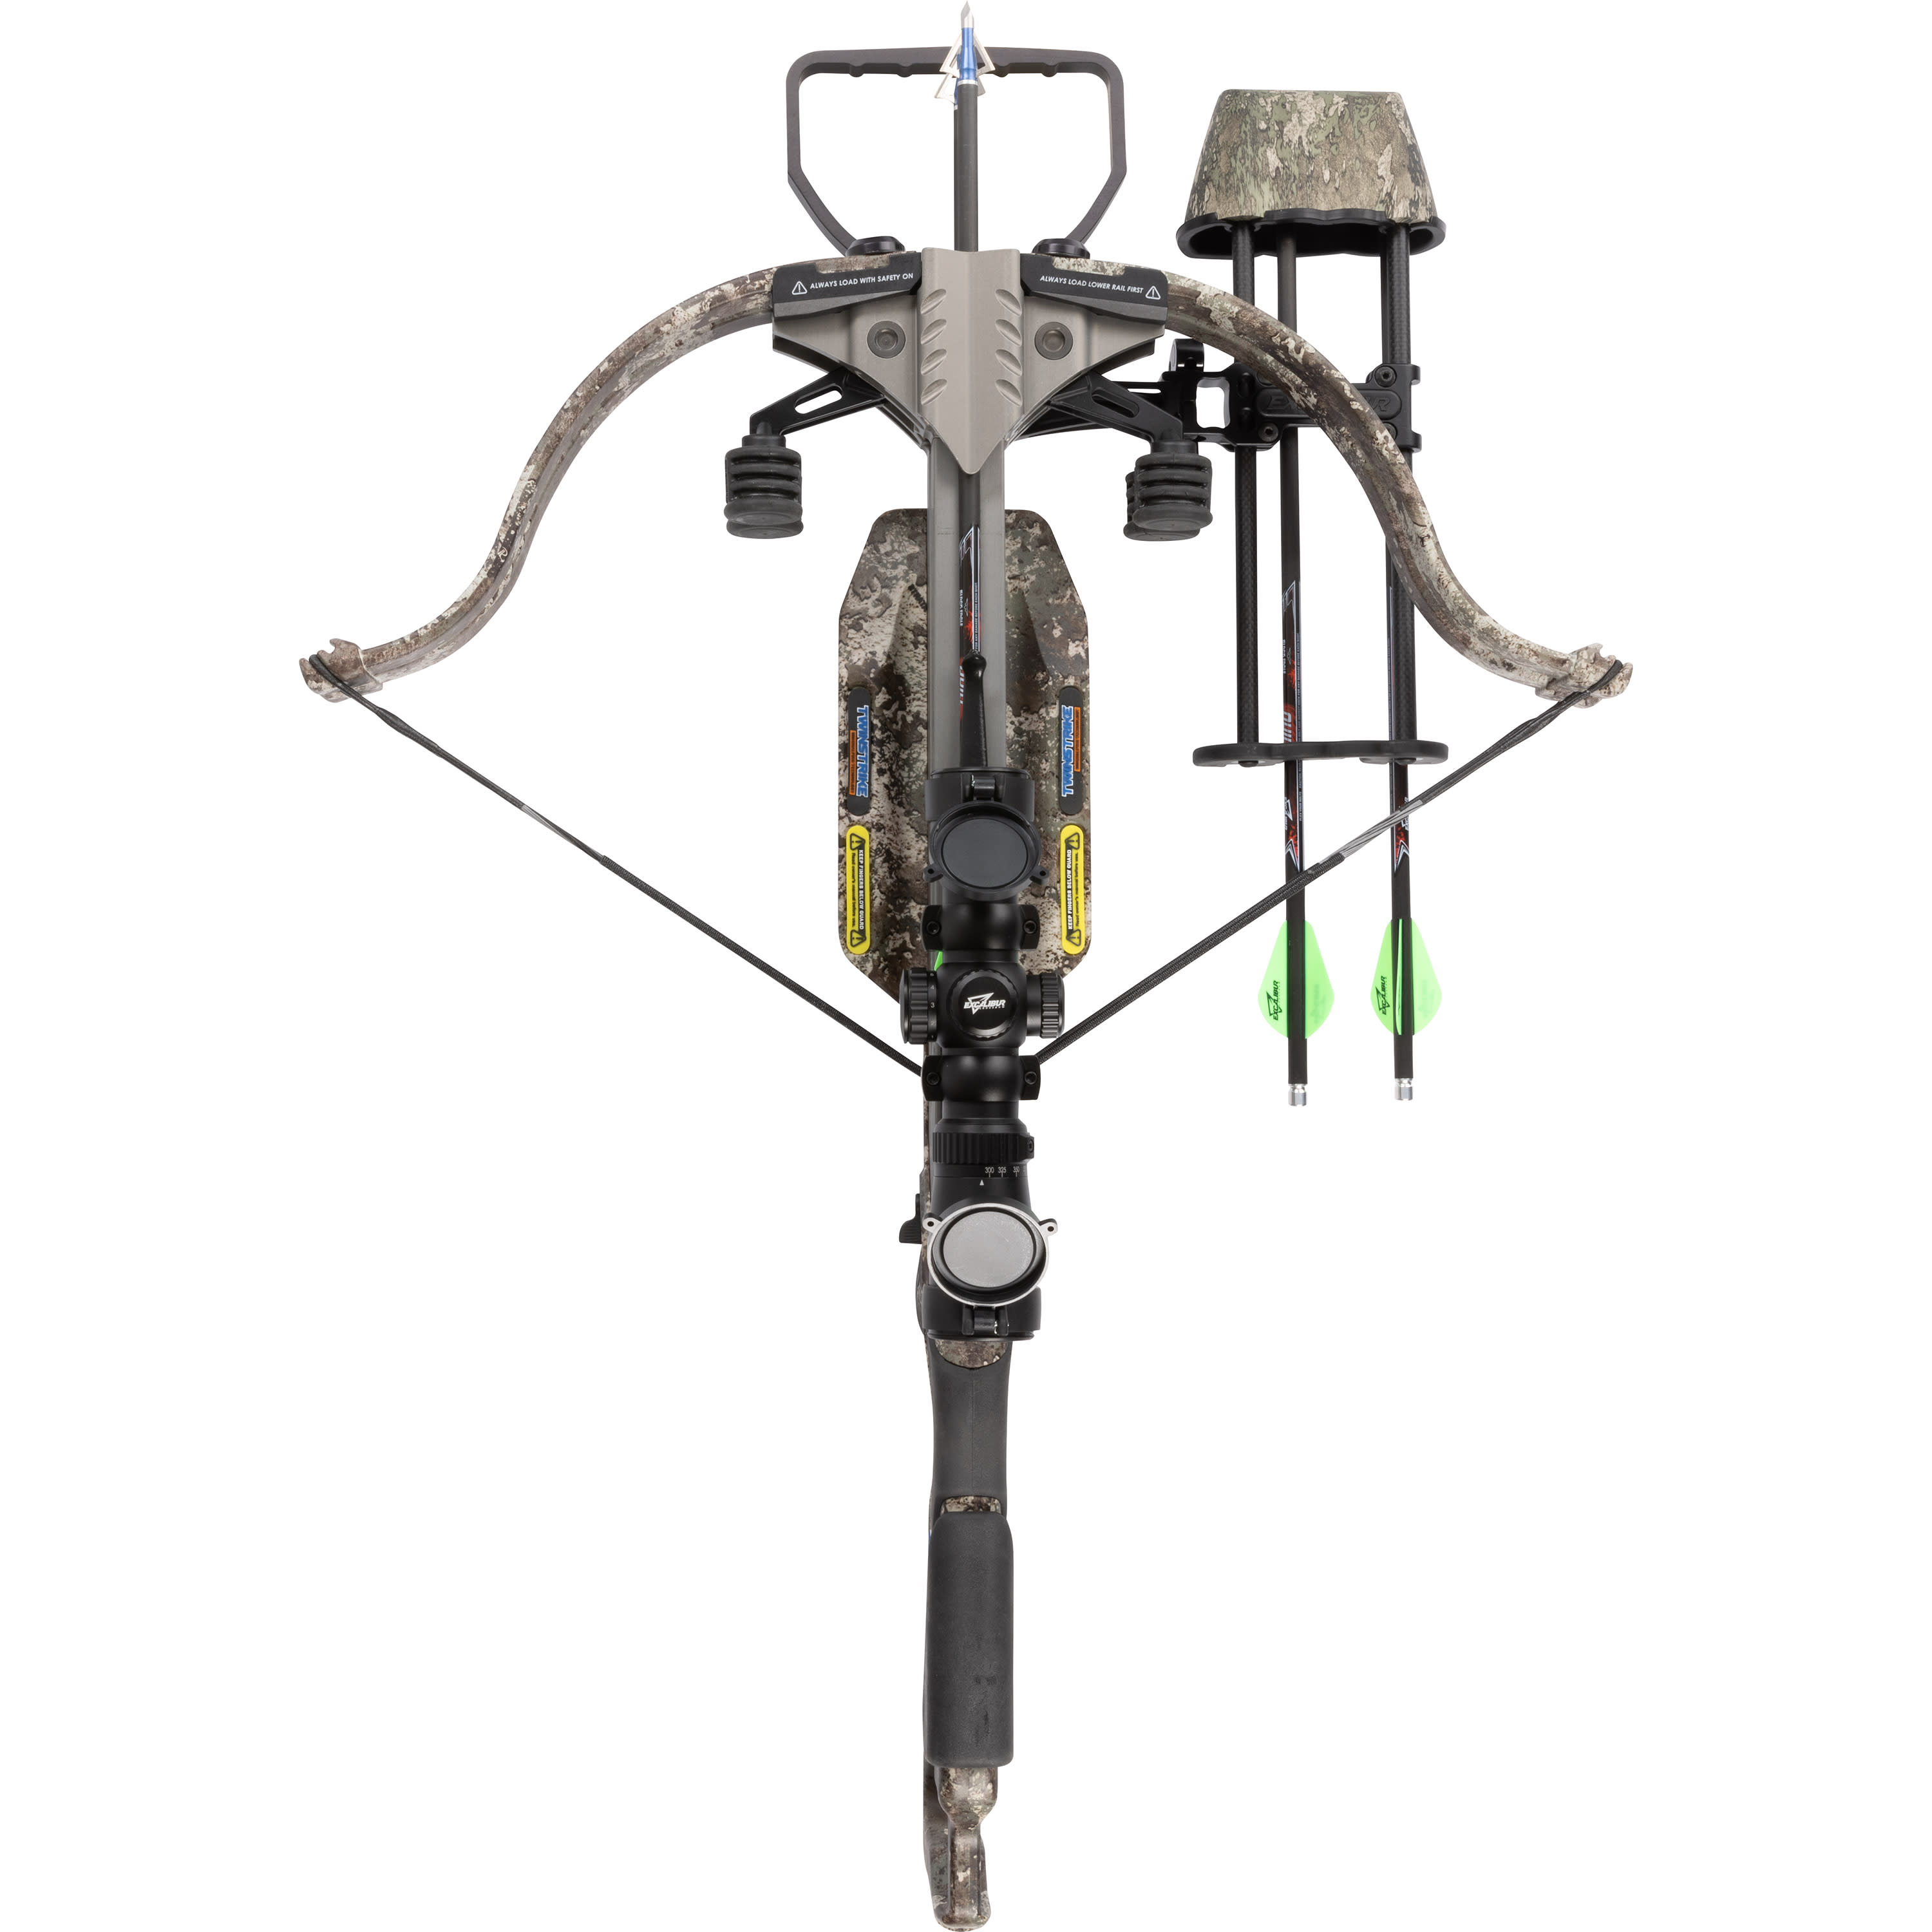 Excalibur Twinstrike Tac2 Crossbow Package